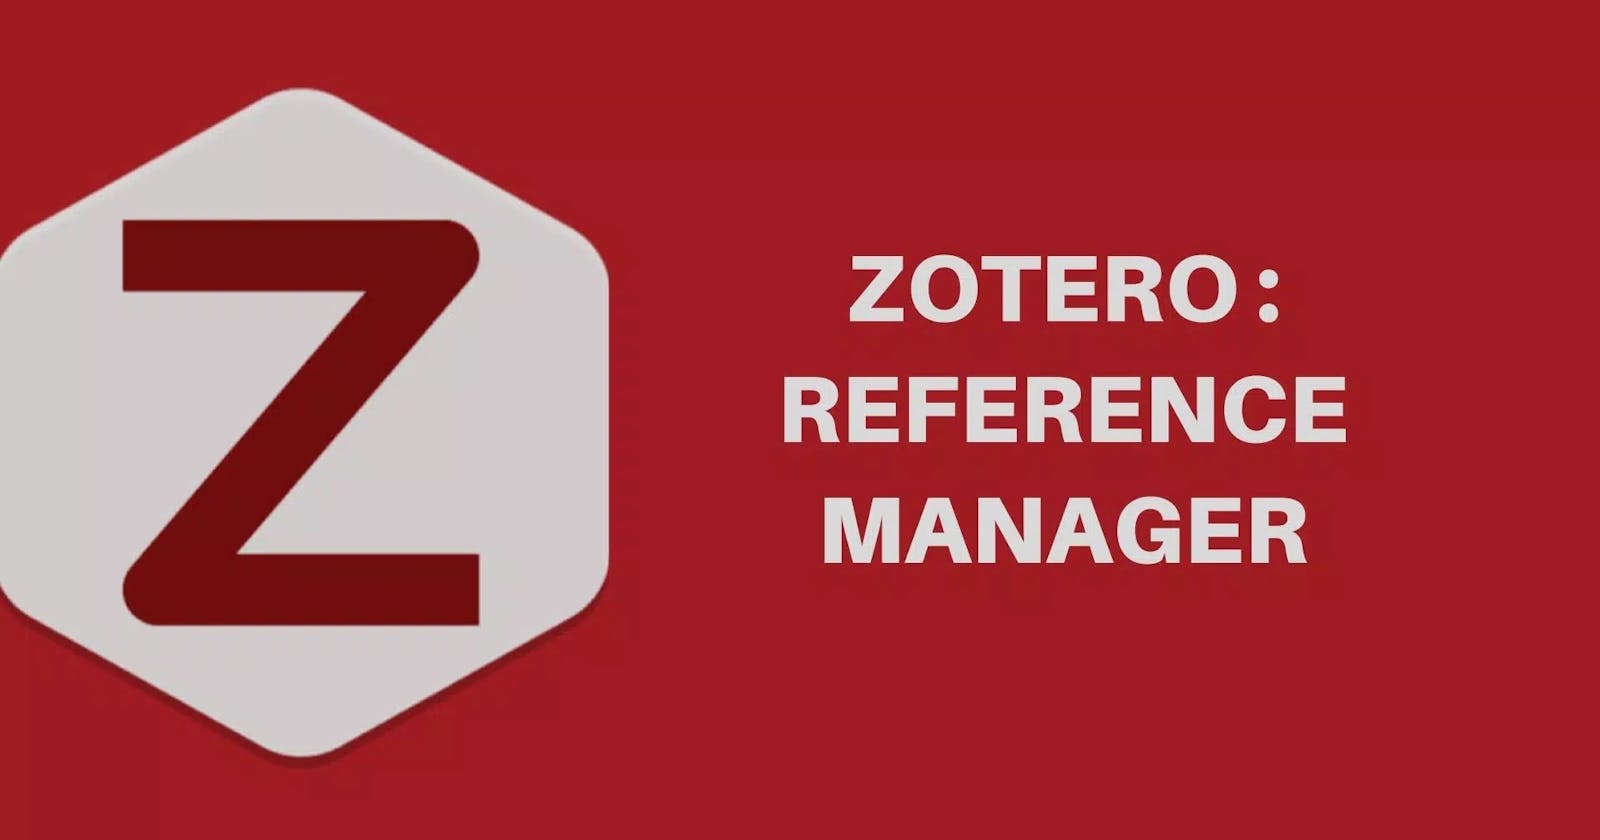 Getting Started using Zotero as a Reference Manager